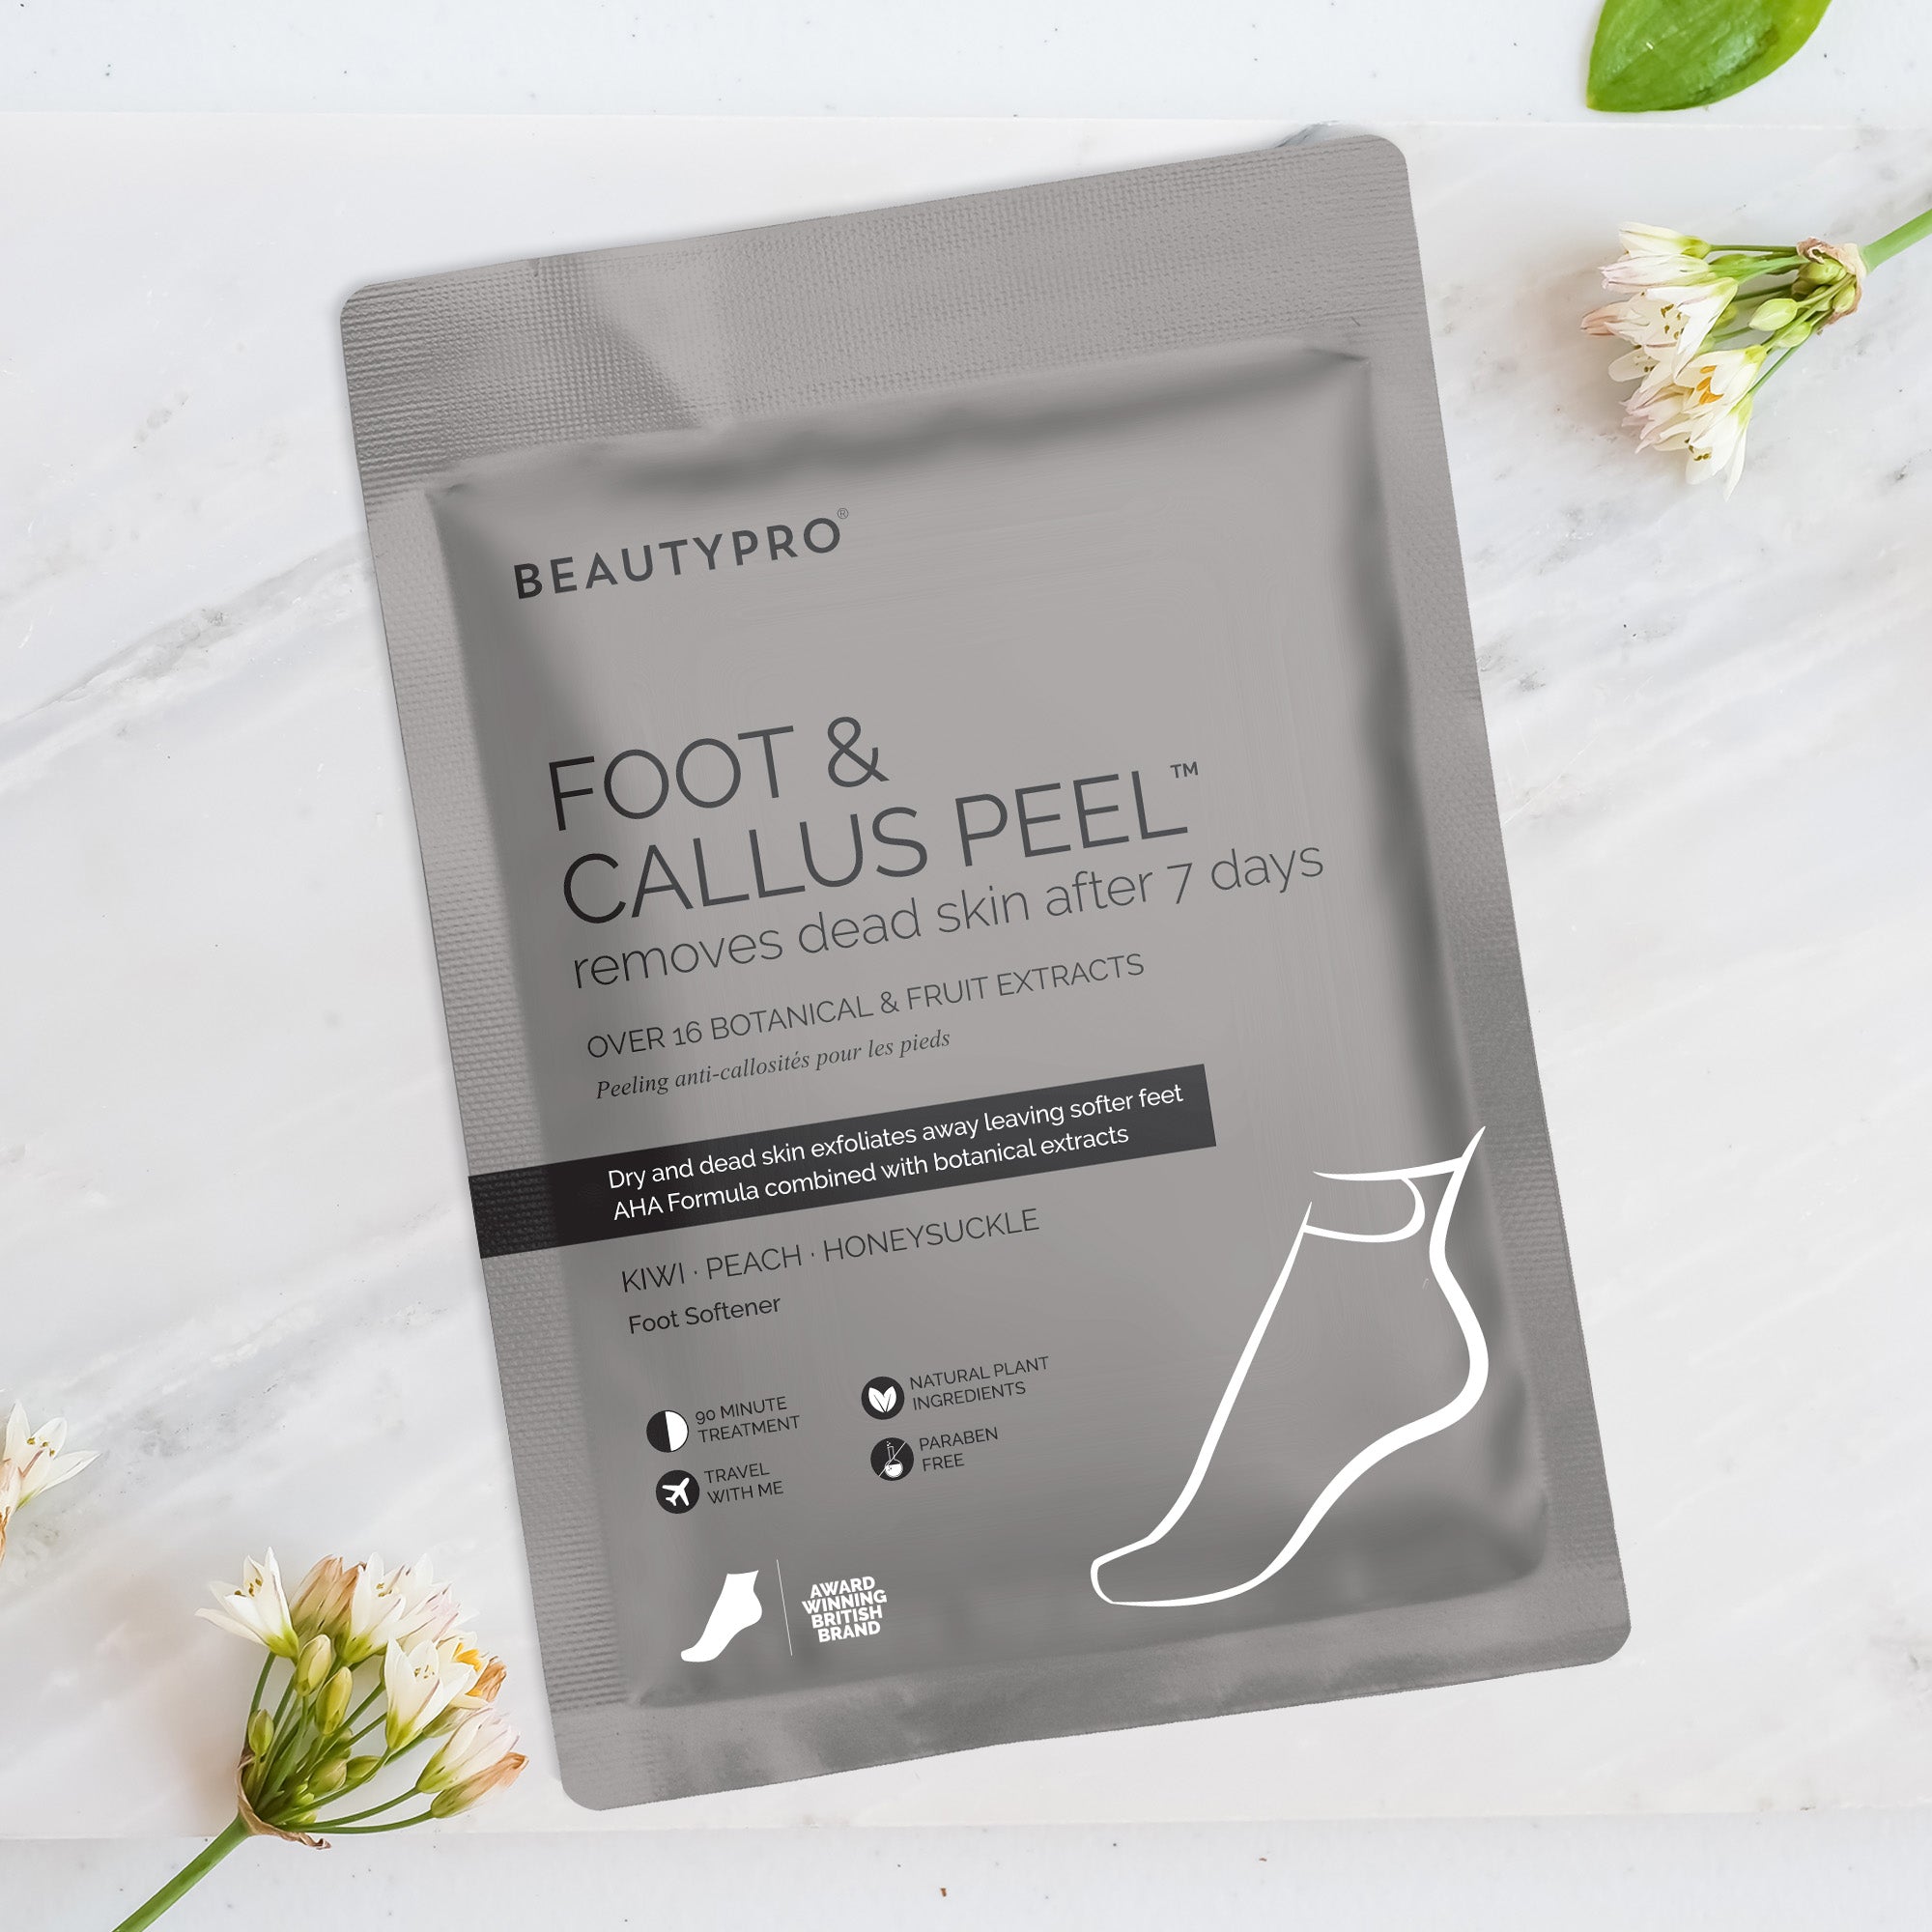 FOOT & CALLUS PEEL with over 16 Botanical & Fruit extracts